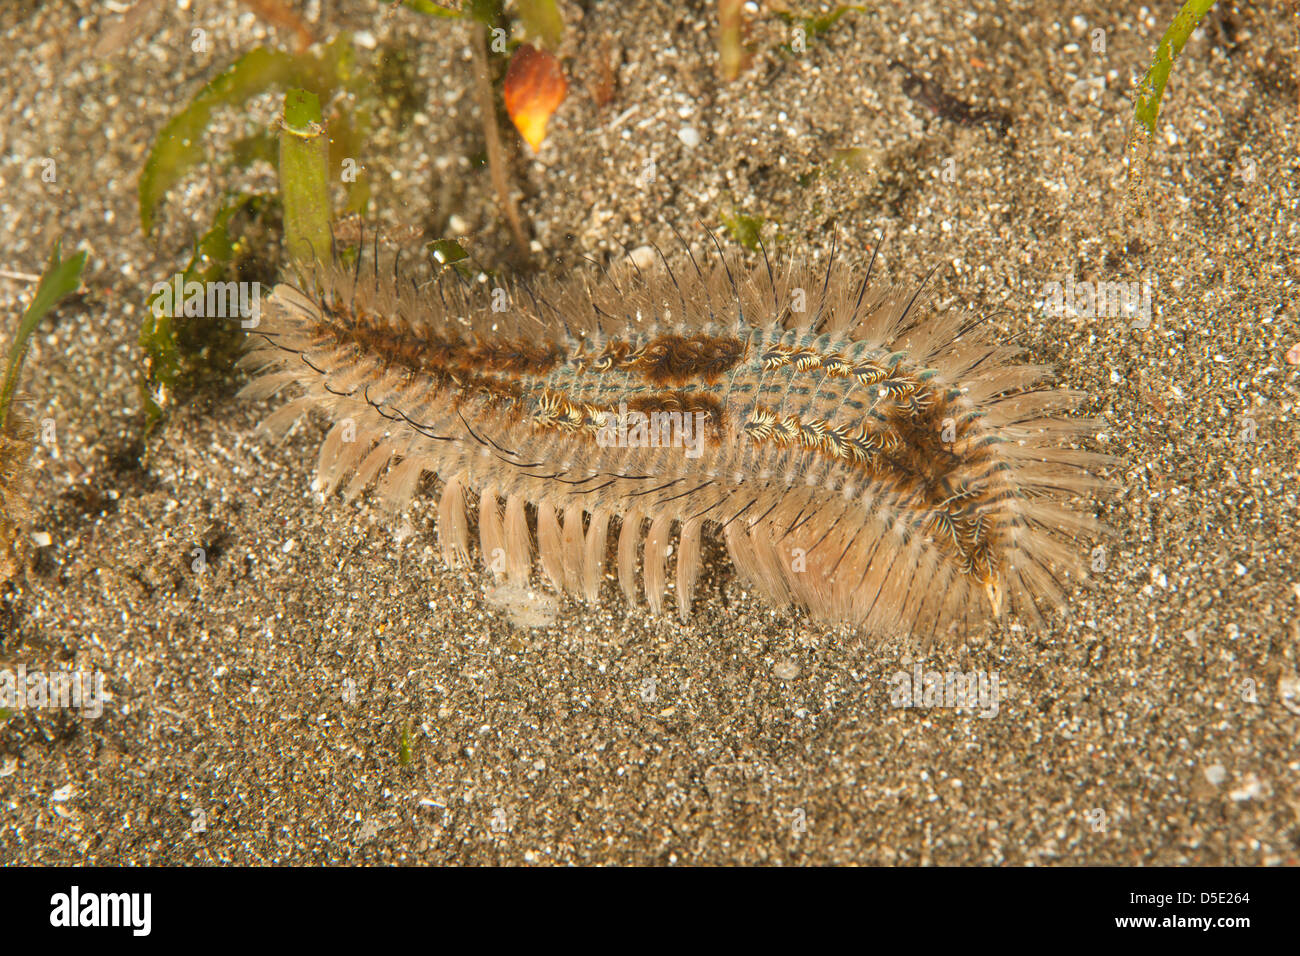 Orange Fire Worm (Eurythoe complanata), crawling along the sandy bottom at secret bay in Bali, Indonesia. Stock Photo